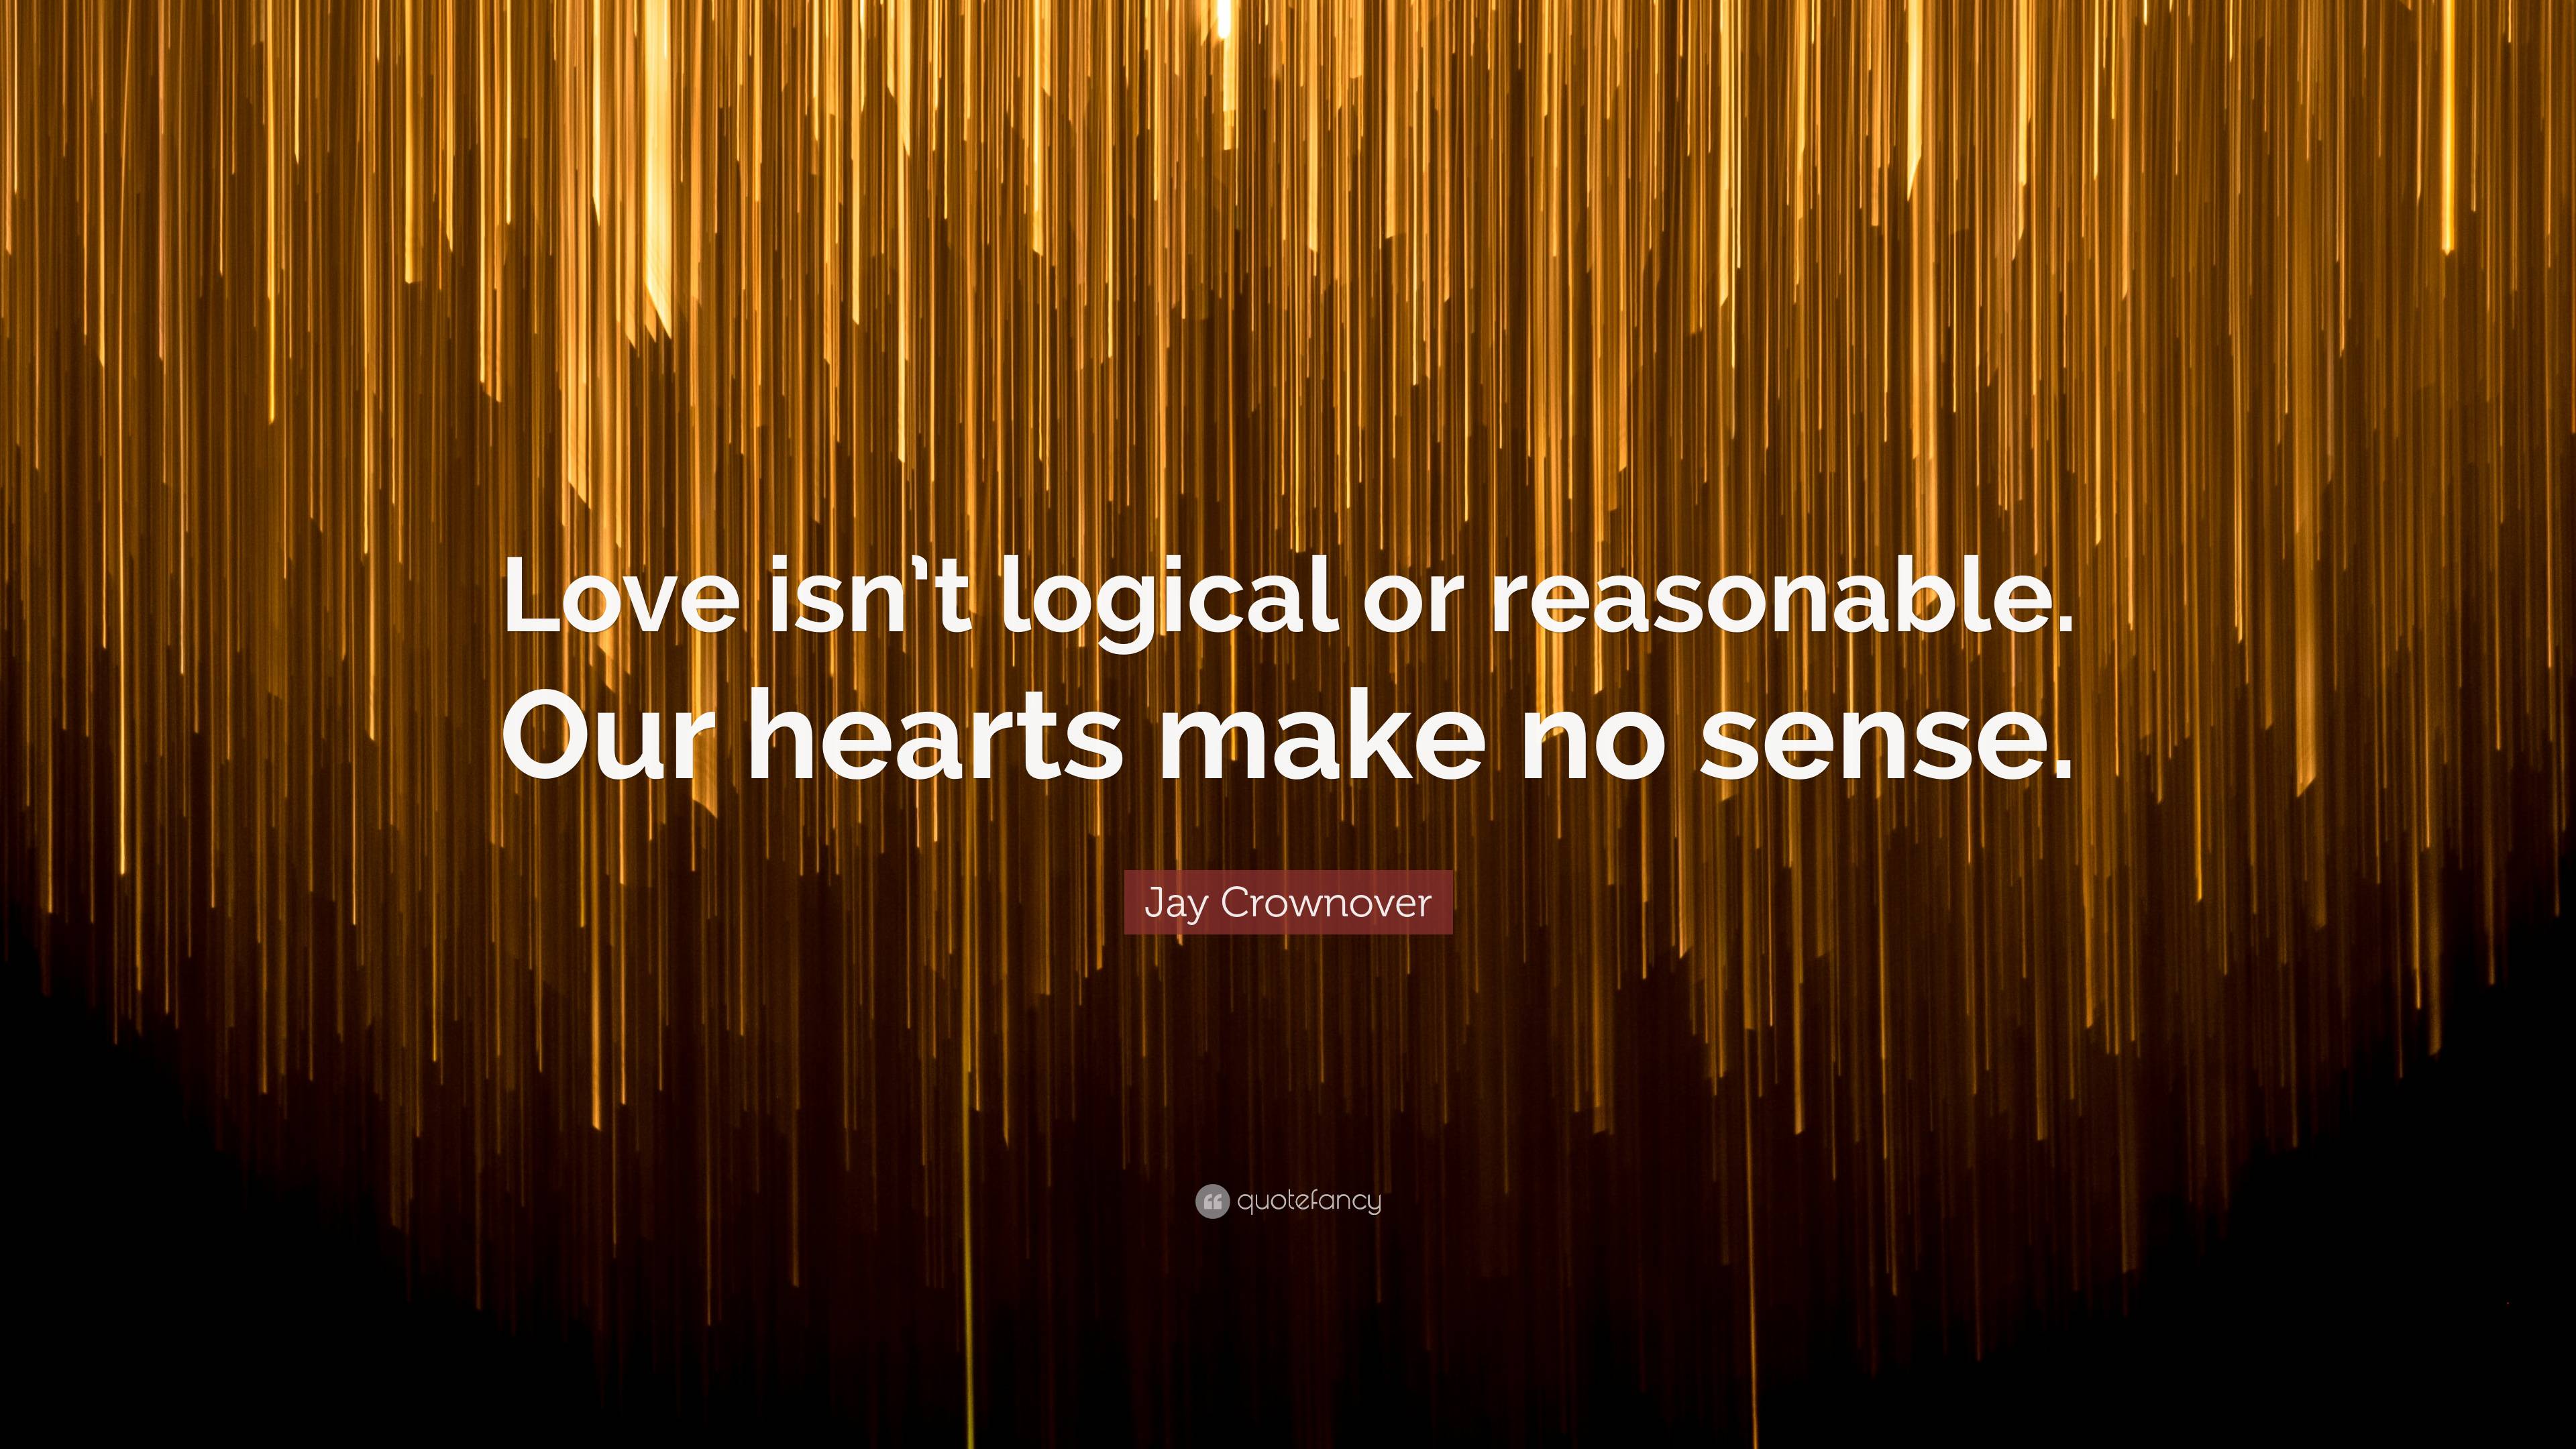 Jay Crownover Quote “love Isnt Logical Or Reasonable Our Hearts Make No Sense”